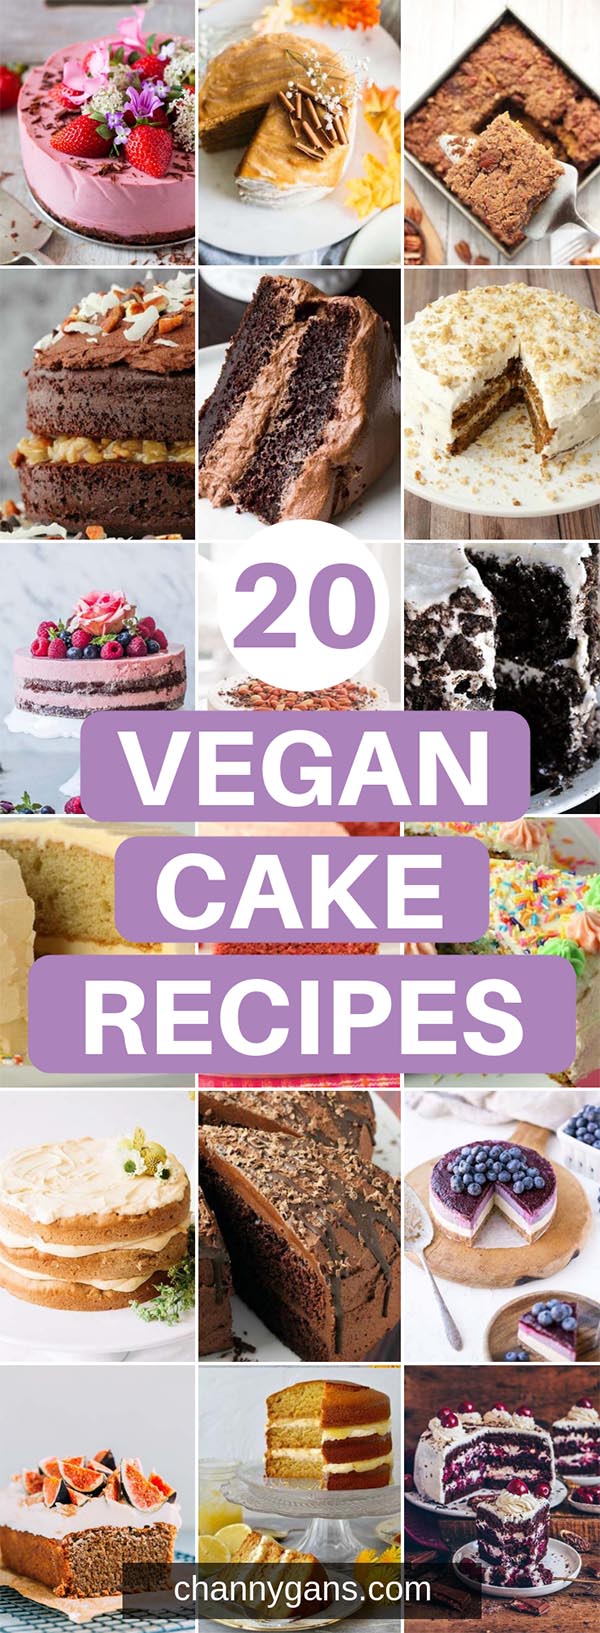 You can definitely have your vegan cake and eat it too with these delicious vegan cake recipes! From chocolate, vanilla, Funfetti to cheesecake, there is something for everyone.